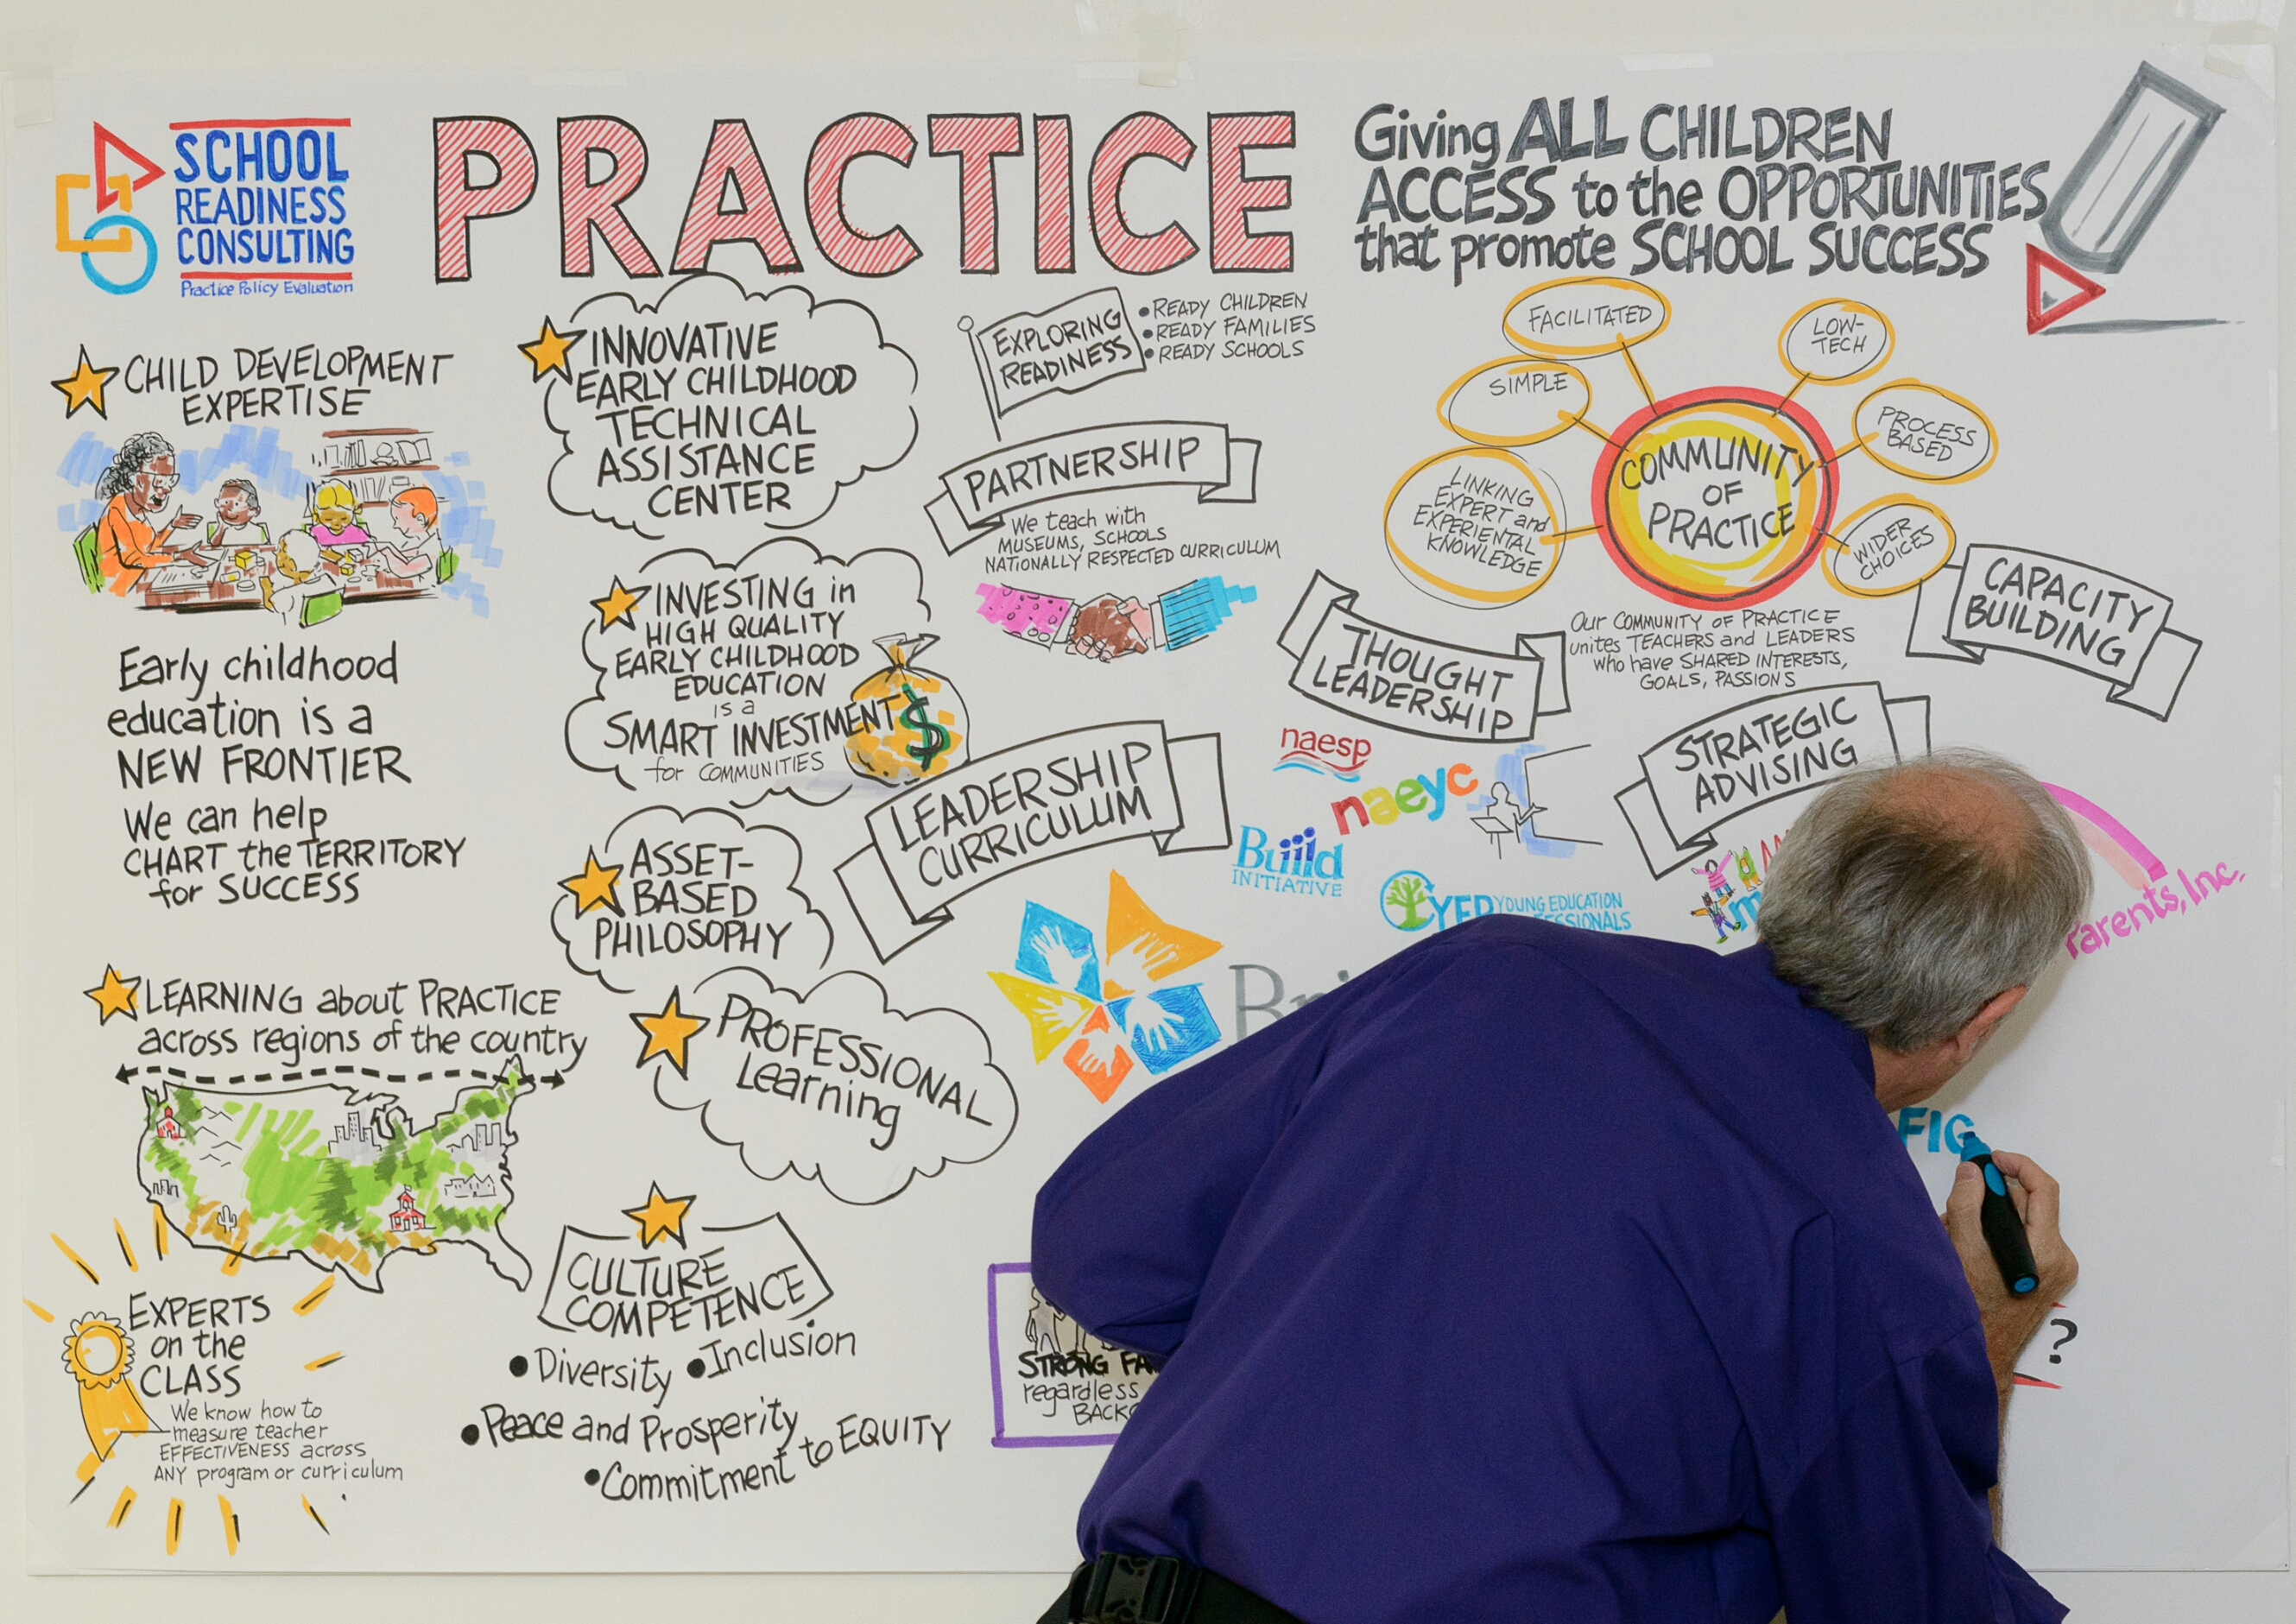 Graphic illustrator, Joe Azar, draws the visual story of School Readiness Consulting's mission and work.